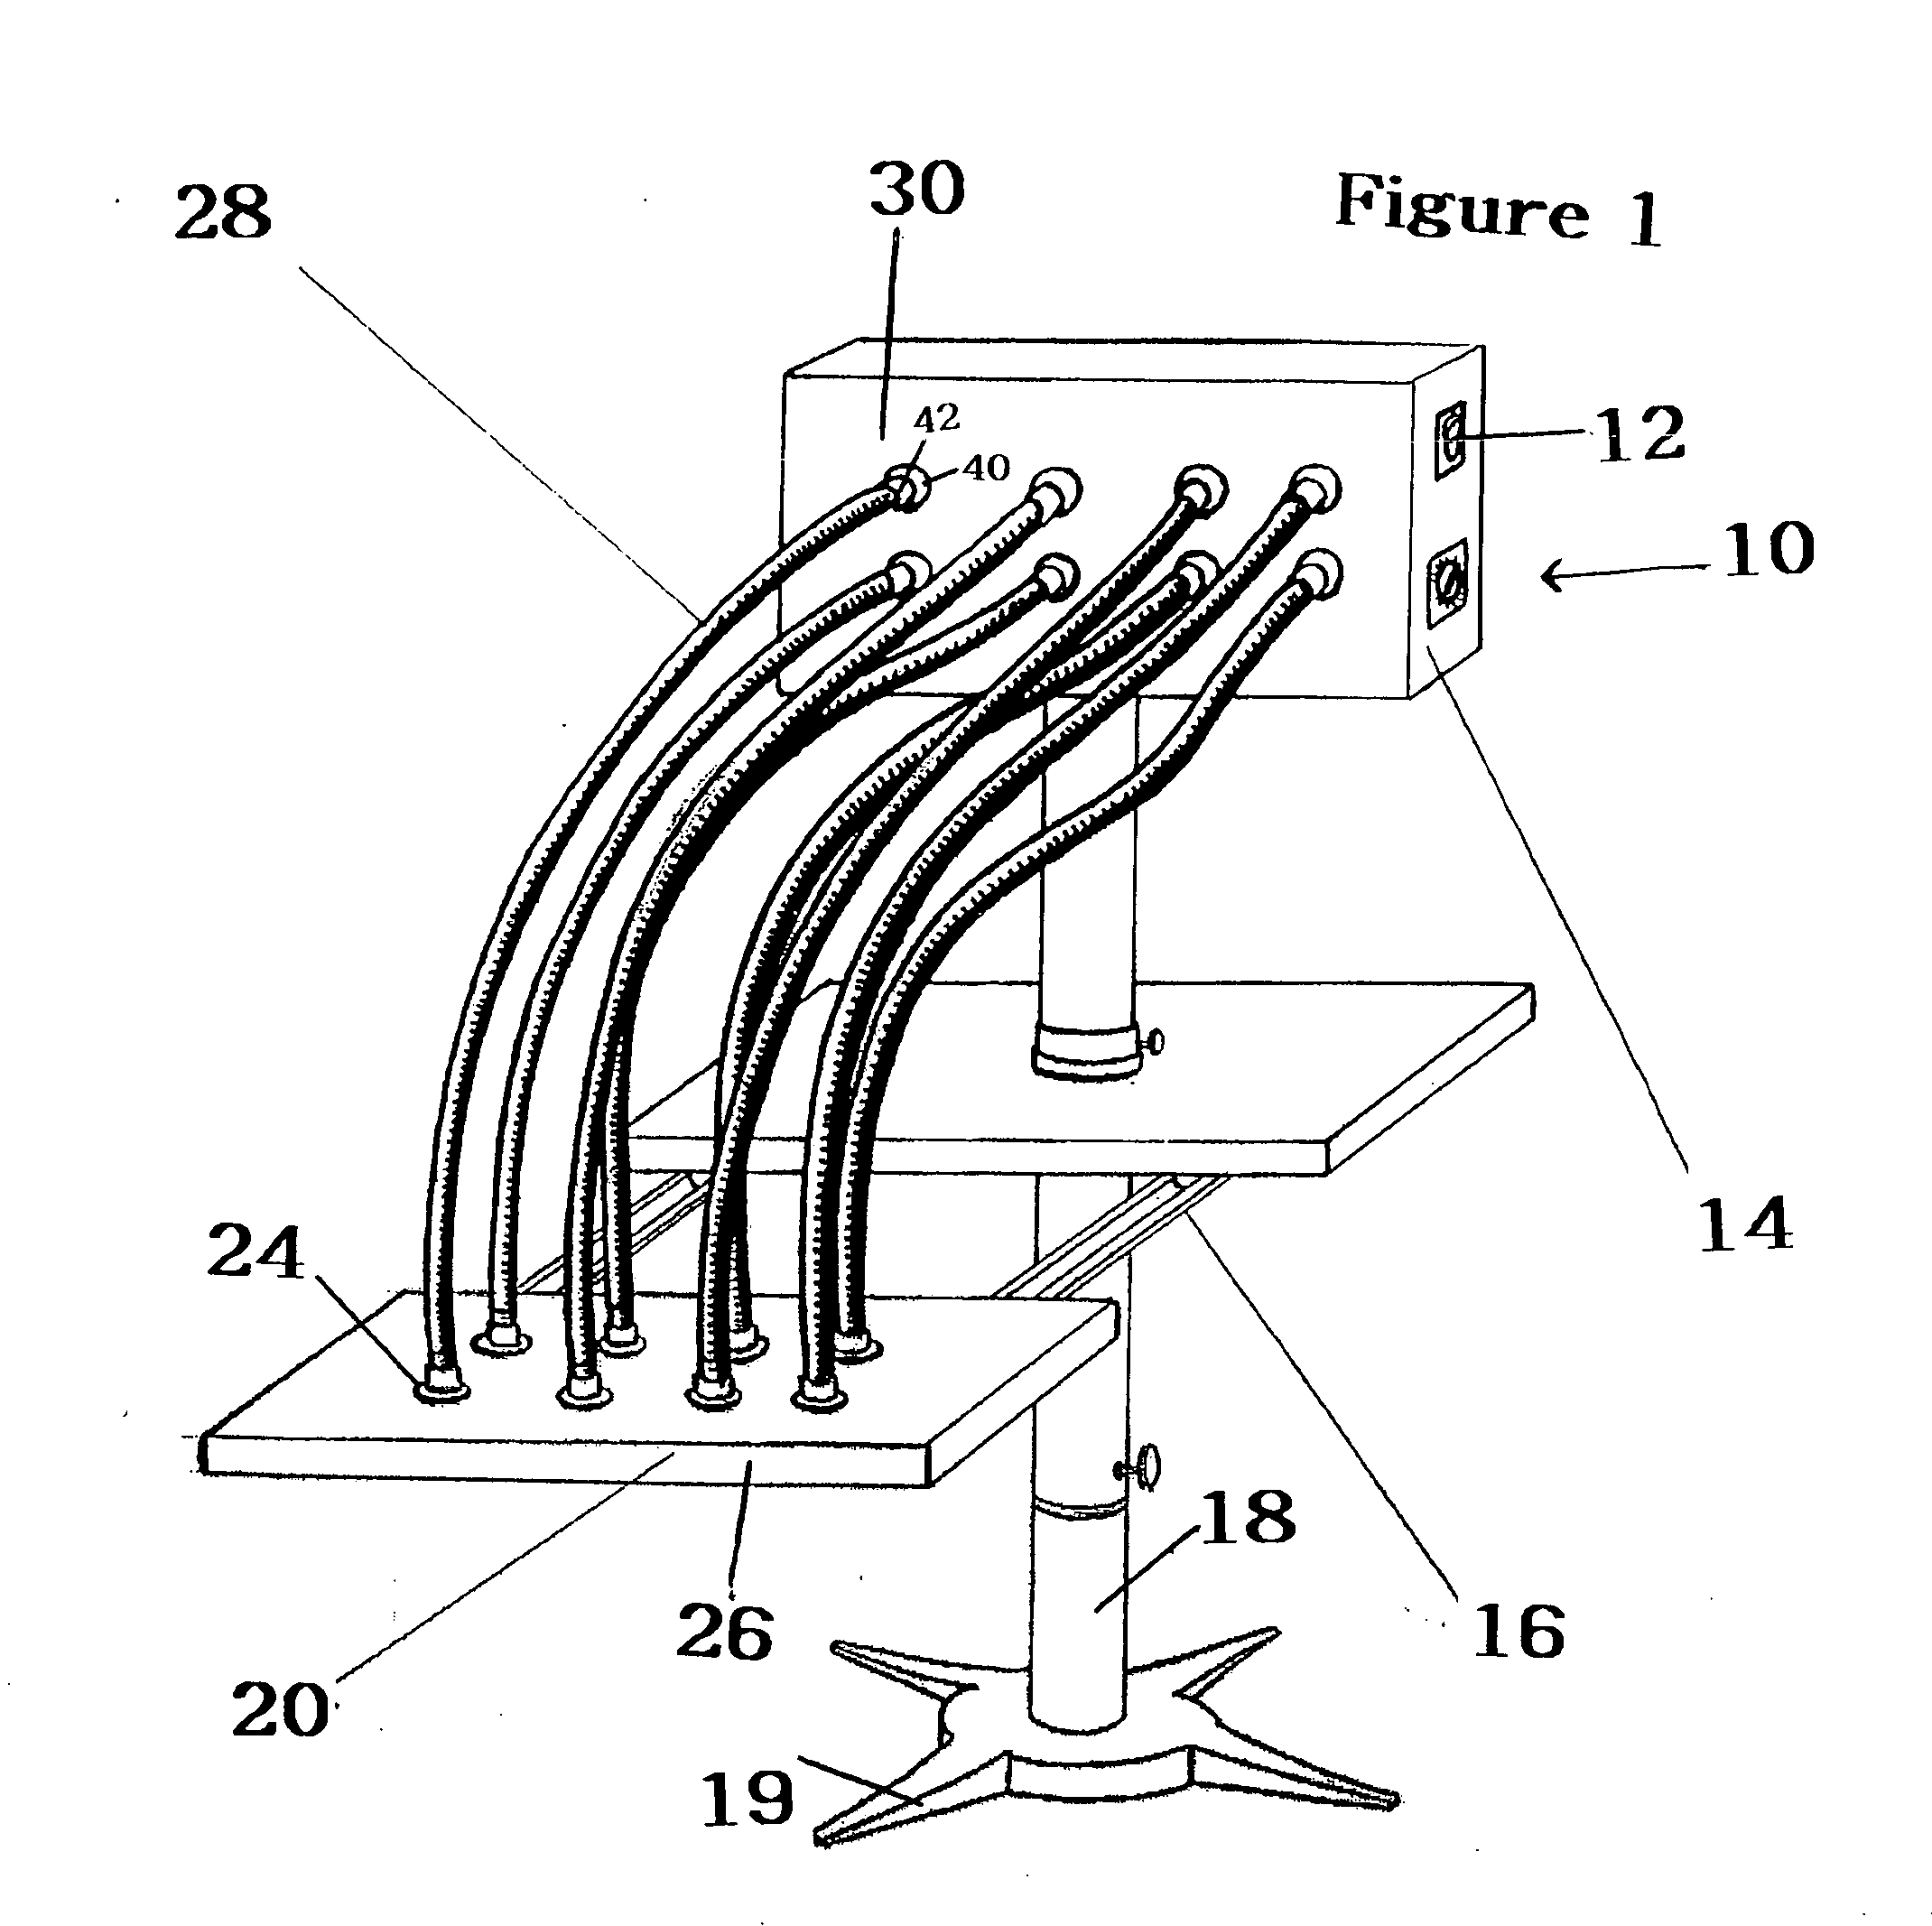 Device for treating infants with light